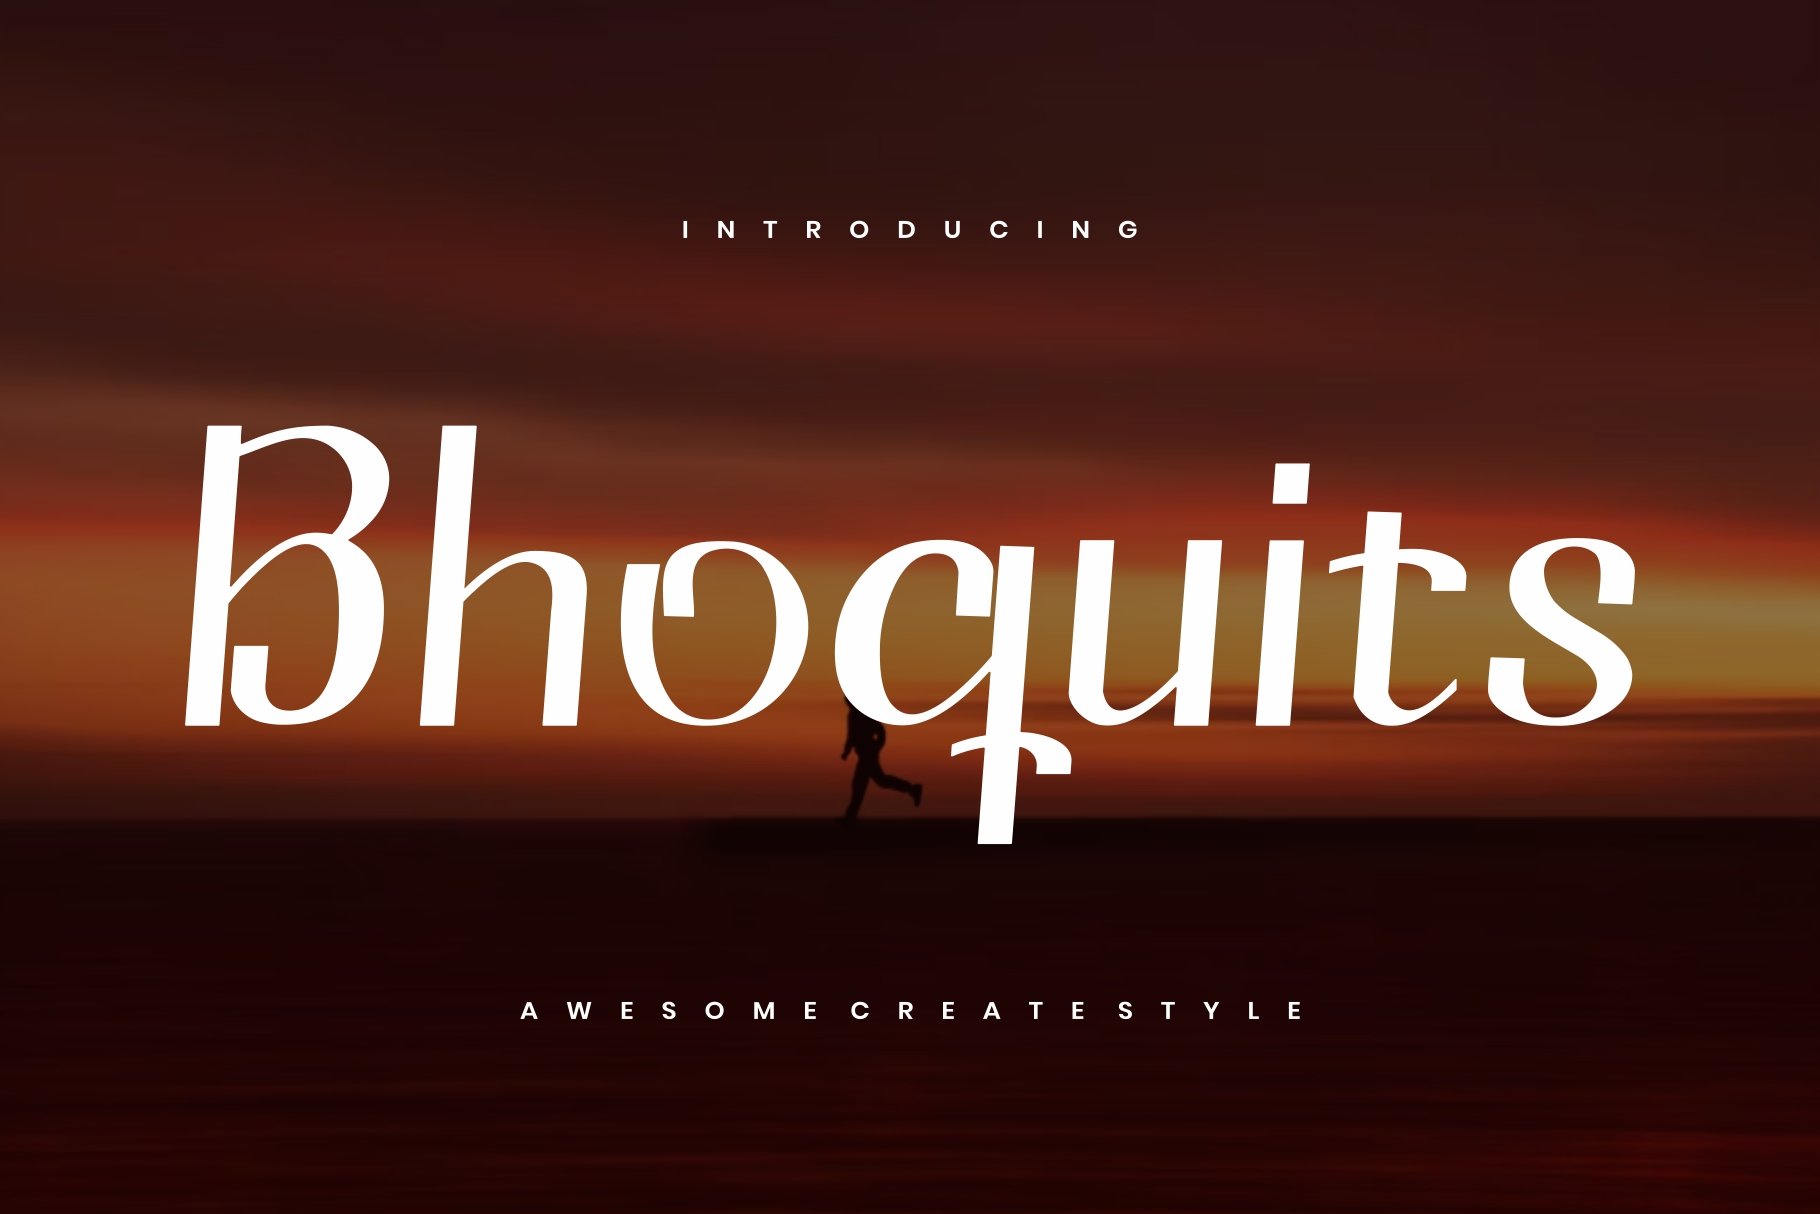 Bhoquits - Display Font cover image.